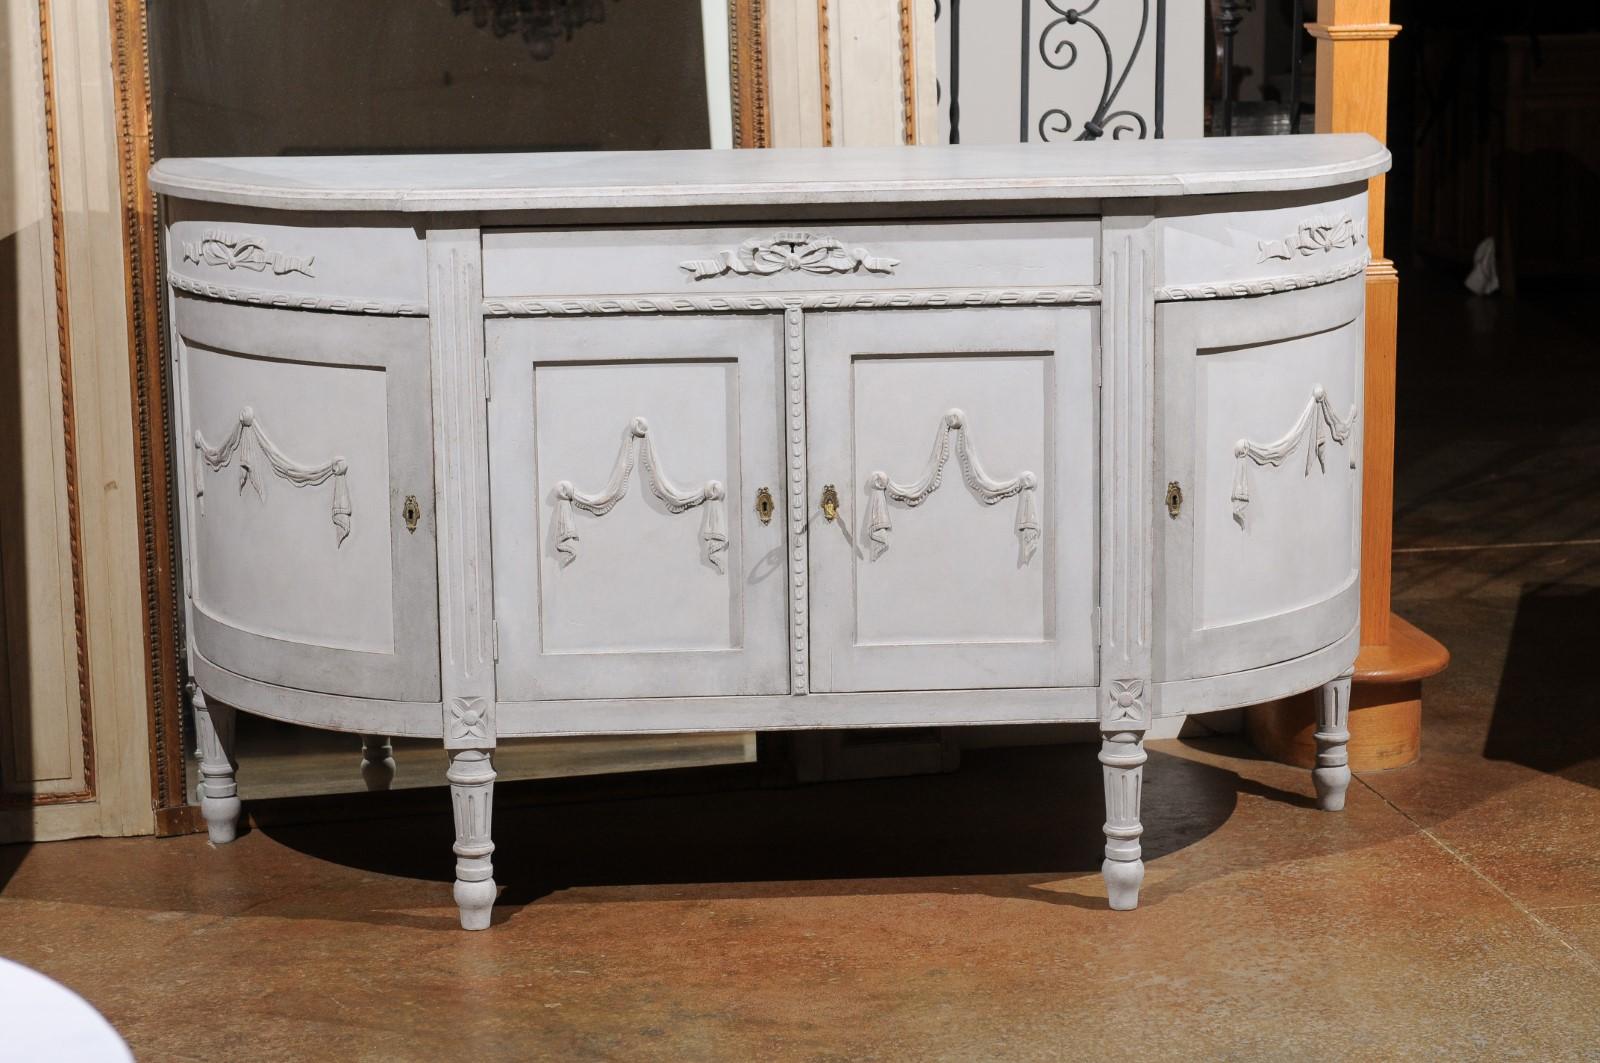 A Swedish Gustavian style painted wood demilune sideboard from the 20th century with carved swags and ribbons. Born in Sweden during the 20th century, this exquisite sideboard features an elongated semi-circular top sitting above a lovely breakfront